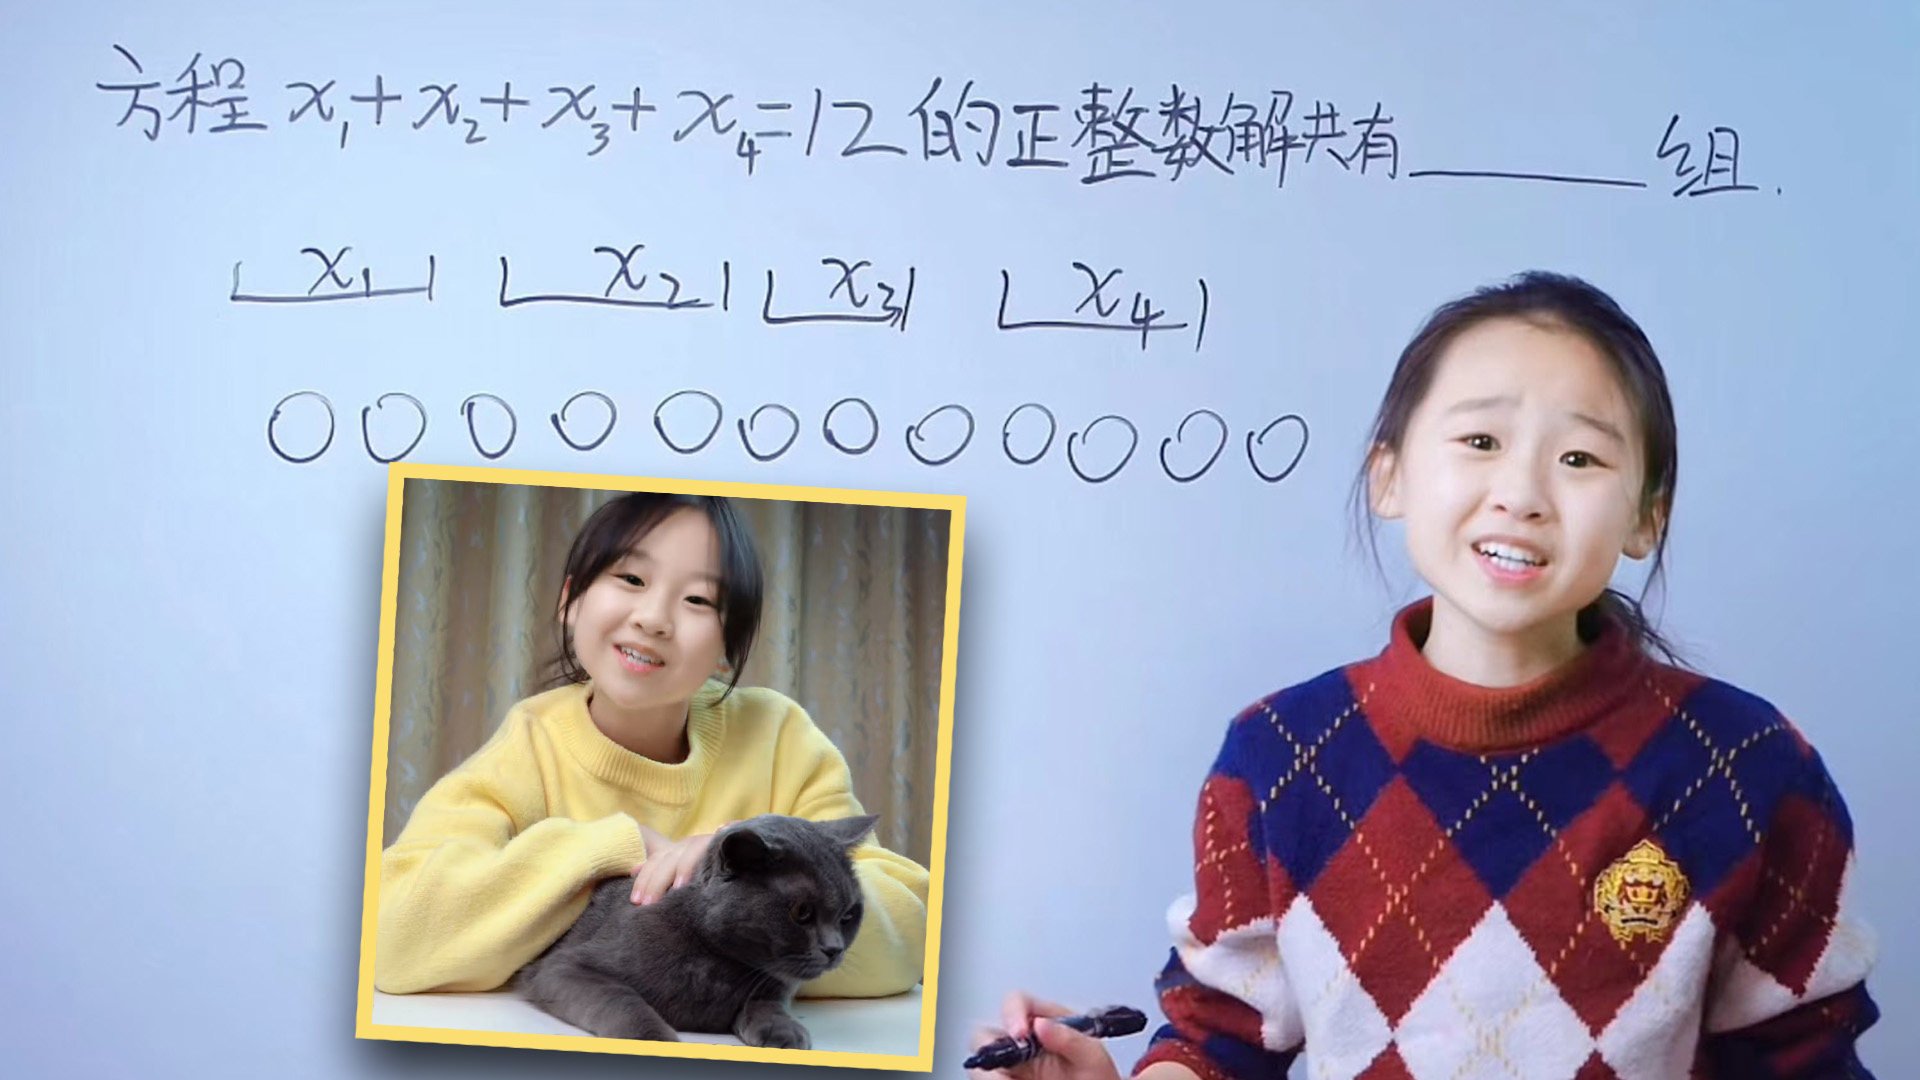 A 12-year-old girl in China who teaches college-level mathematics on mainland social media has not only attracted 2.9 million followers online, she has also sparked a debate about child prodigies. Photo: SCMP composite/Douyin